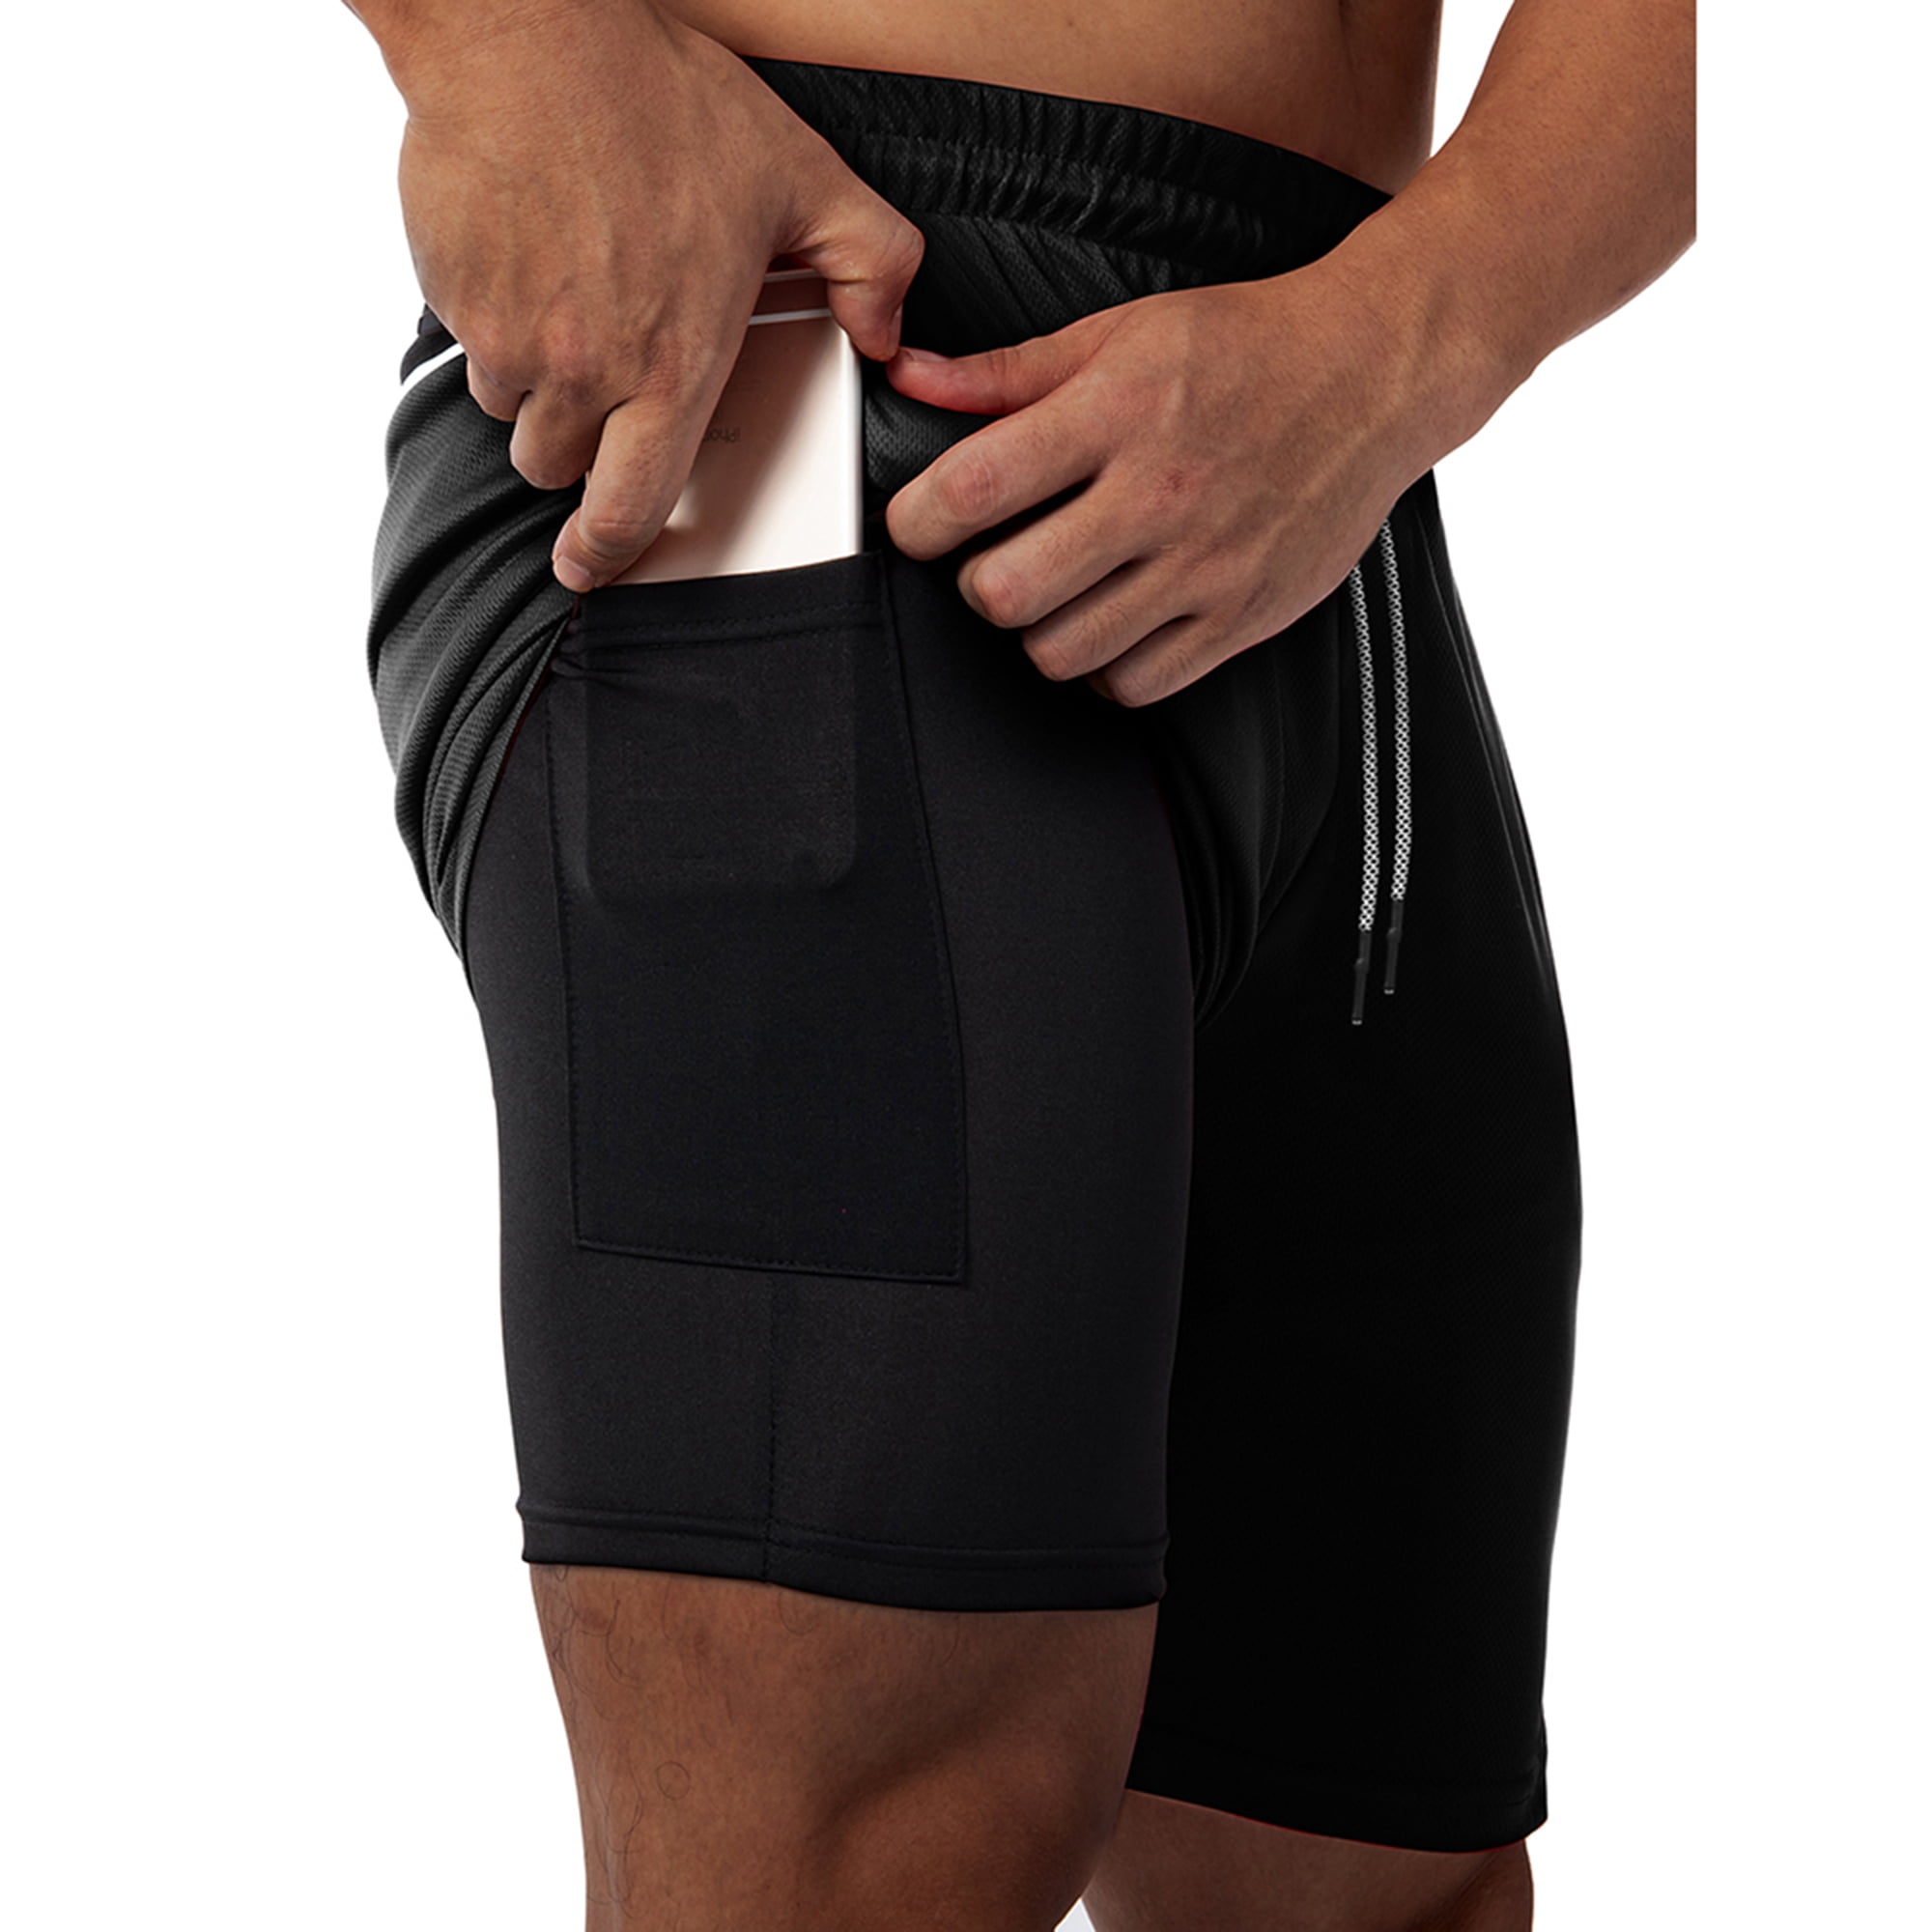 Men's Compression Short, Men's Performance Compression Shorts, Athletic  Base Layer for Muscle Recovery Bodybuilding Men Shorts, Men's Dry Fit  Running Workout Compression Shorts, M/L/XL/2XL, Black 